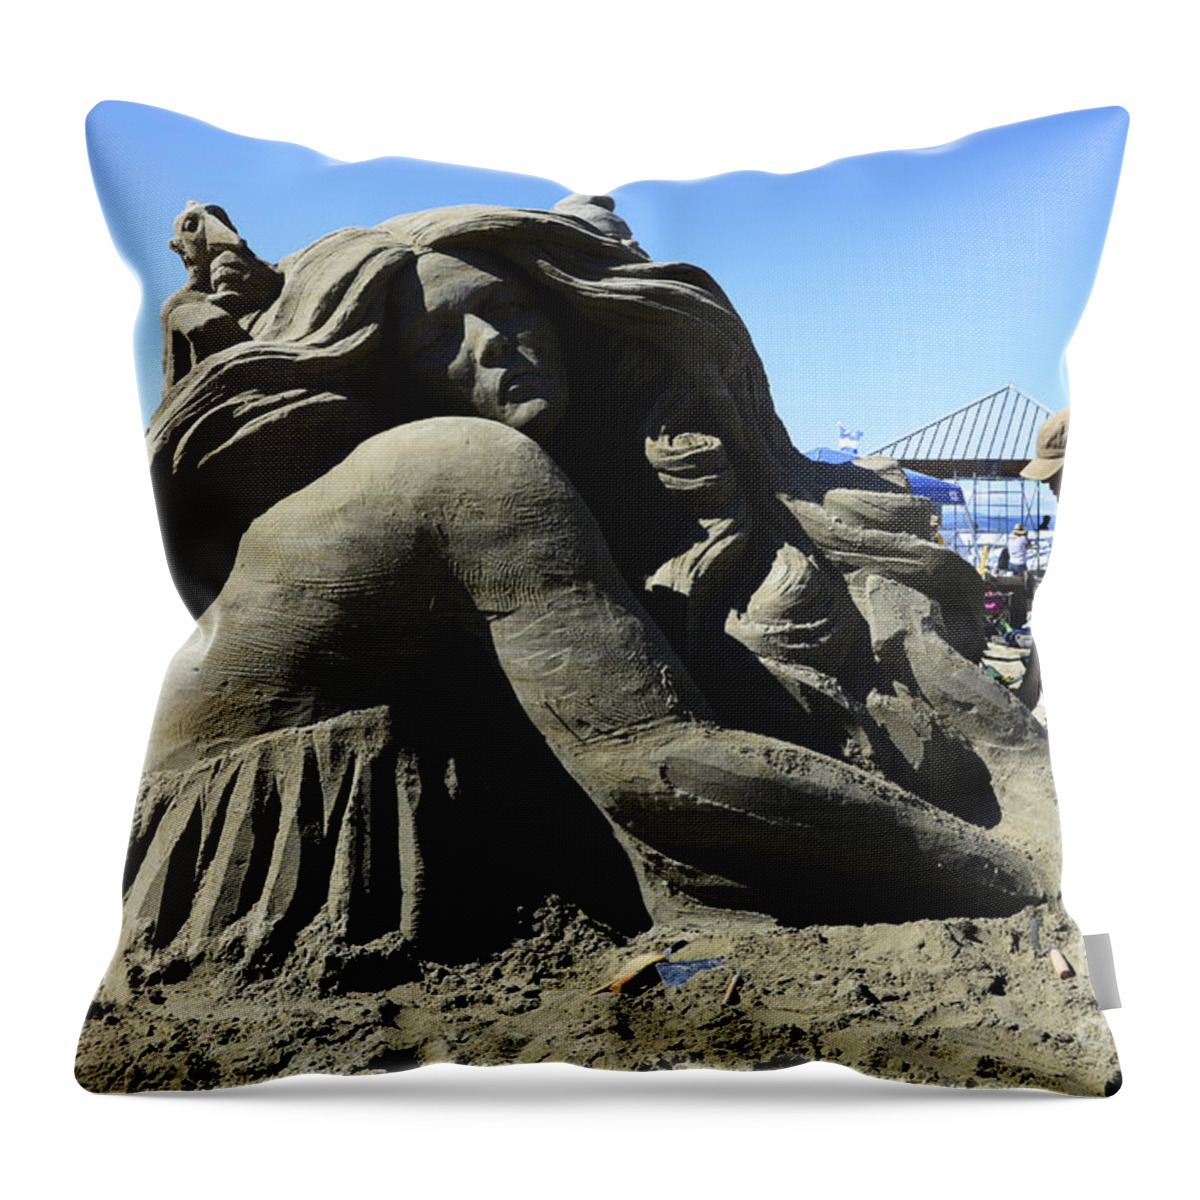  Sand Throw Pillow featuring the photograph Sand Sculpture 1 by Bob Christopher